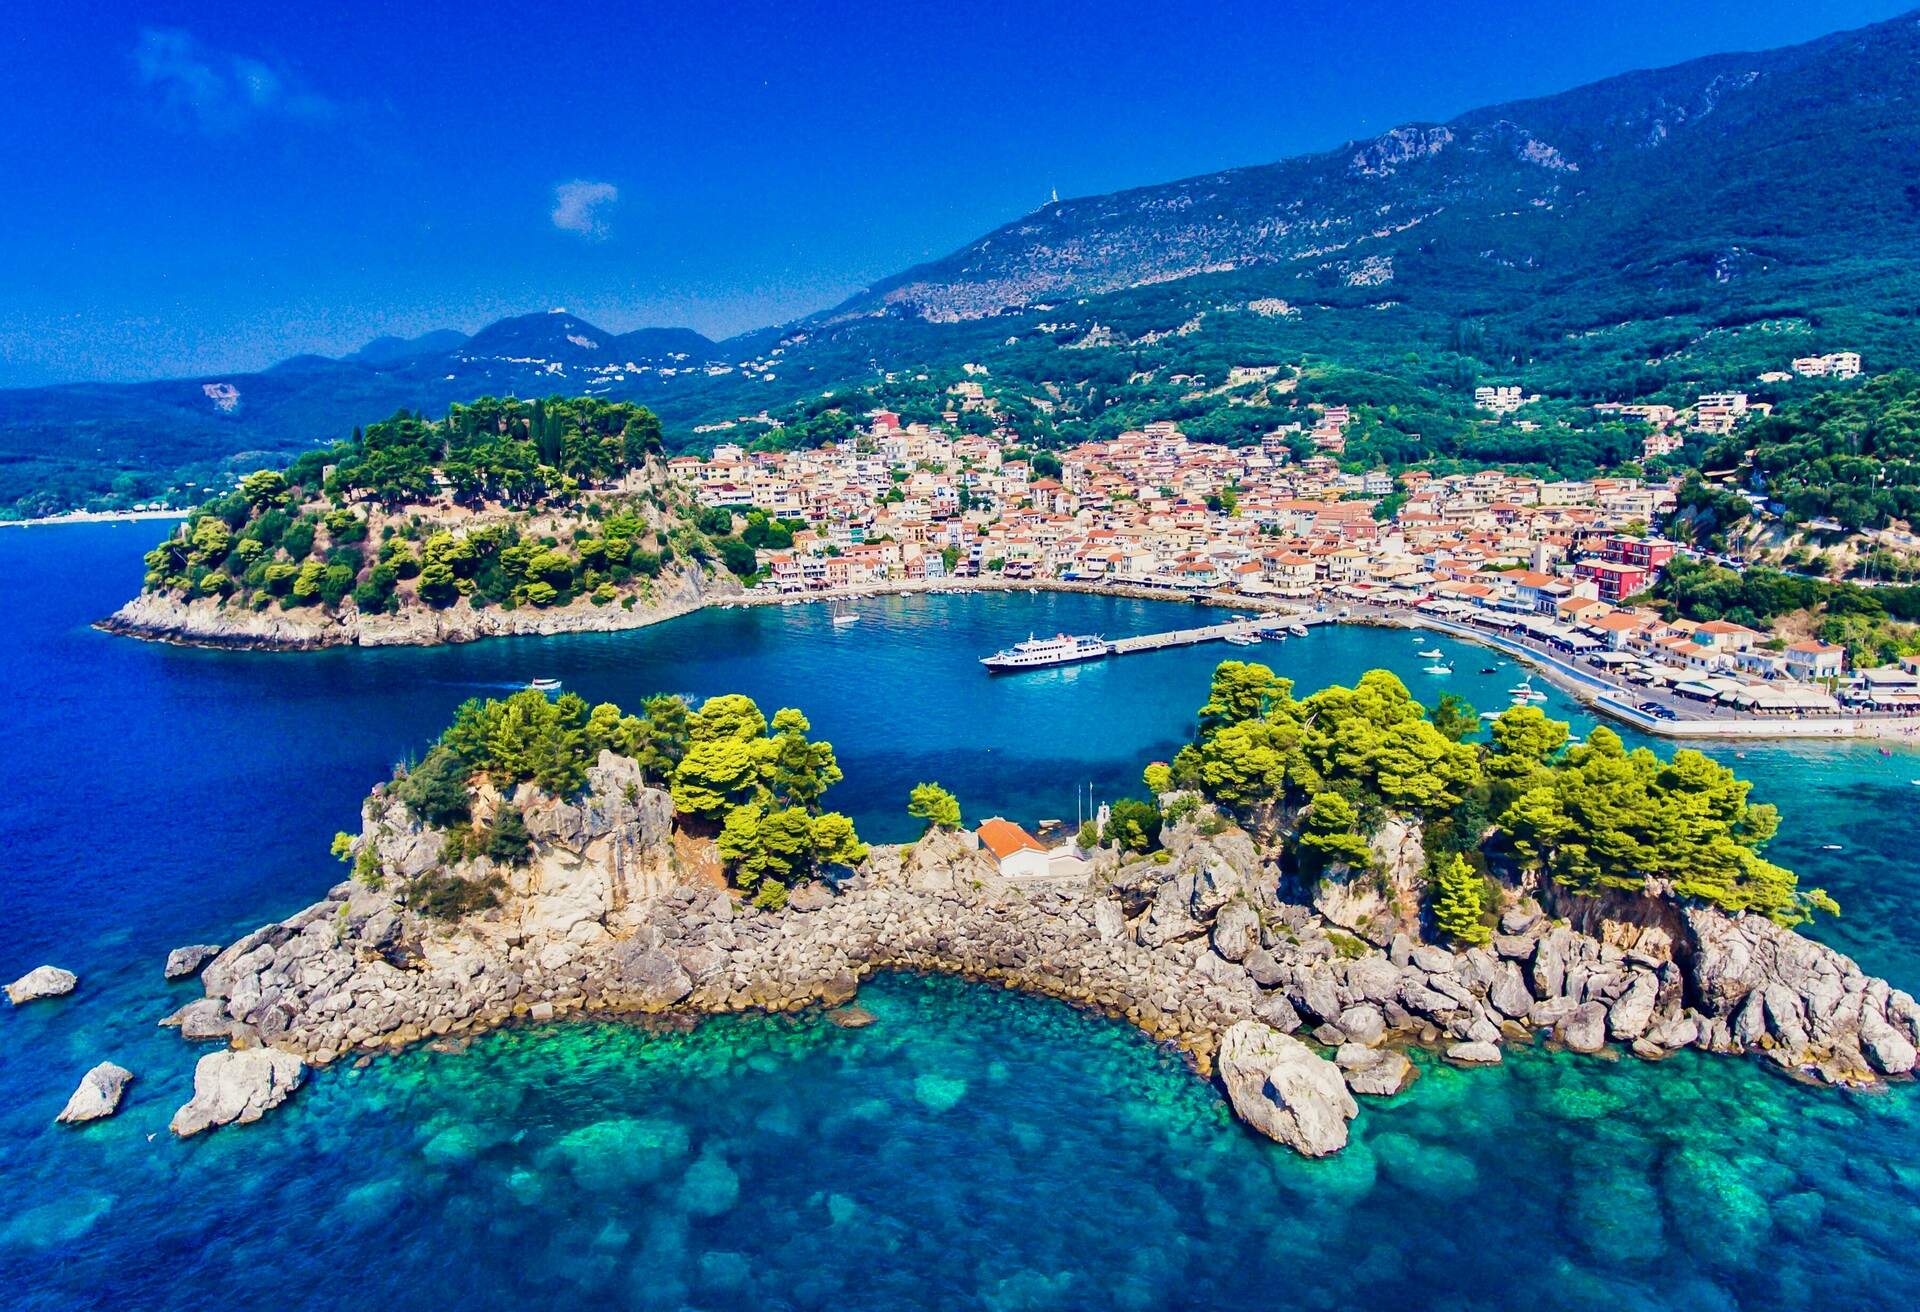 Parga Greece and Panagia Island aerial view. Important tourist destination on the east coast of Greece.; Shutterstock ID 479580466